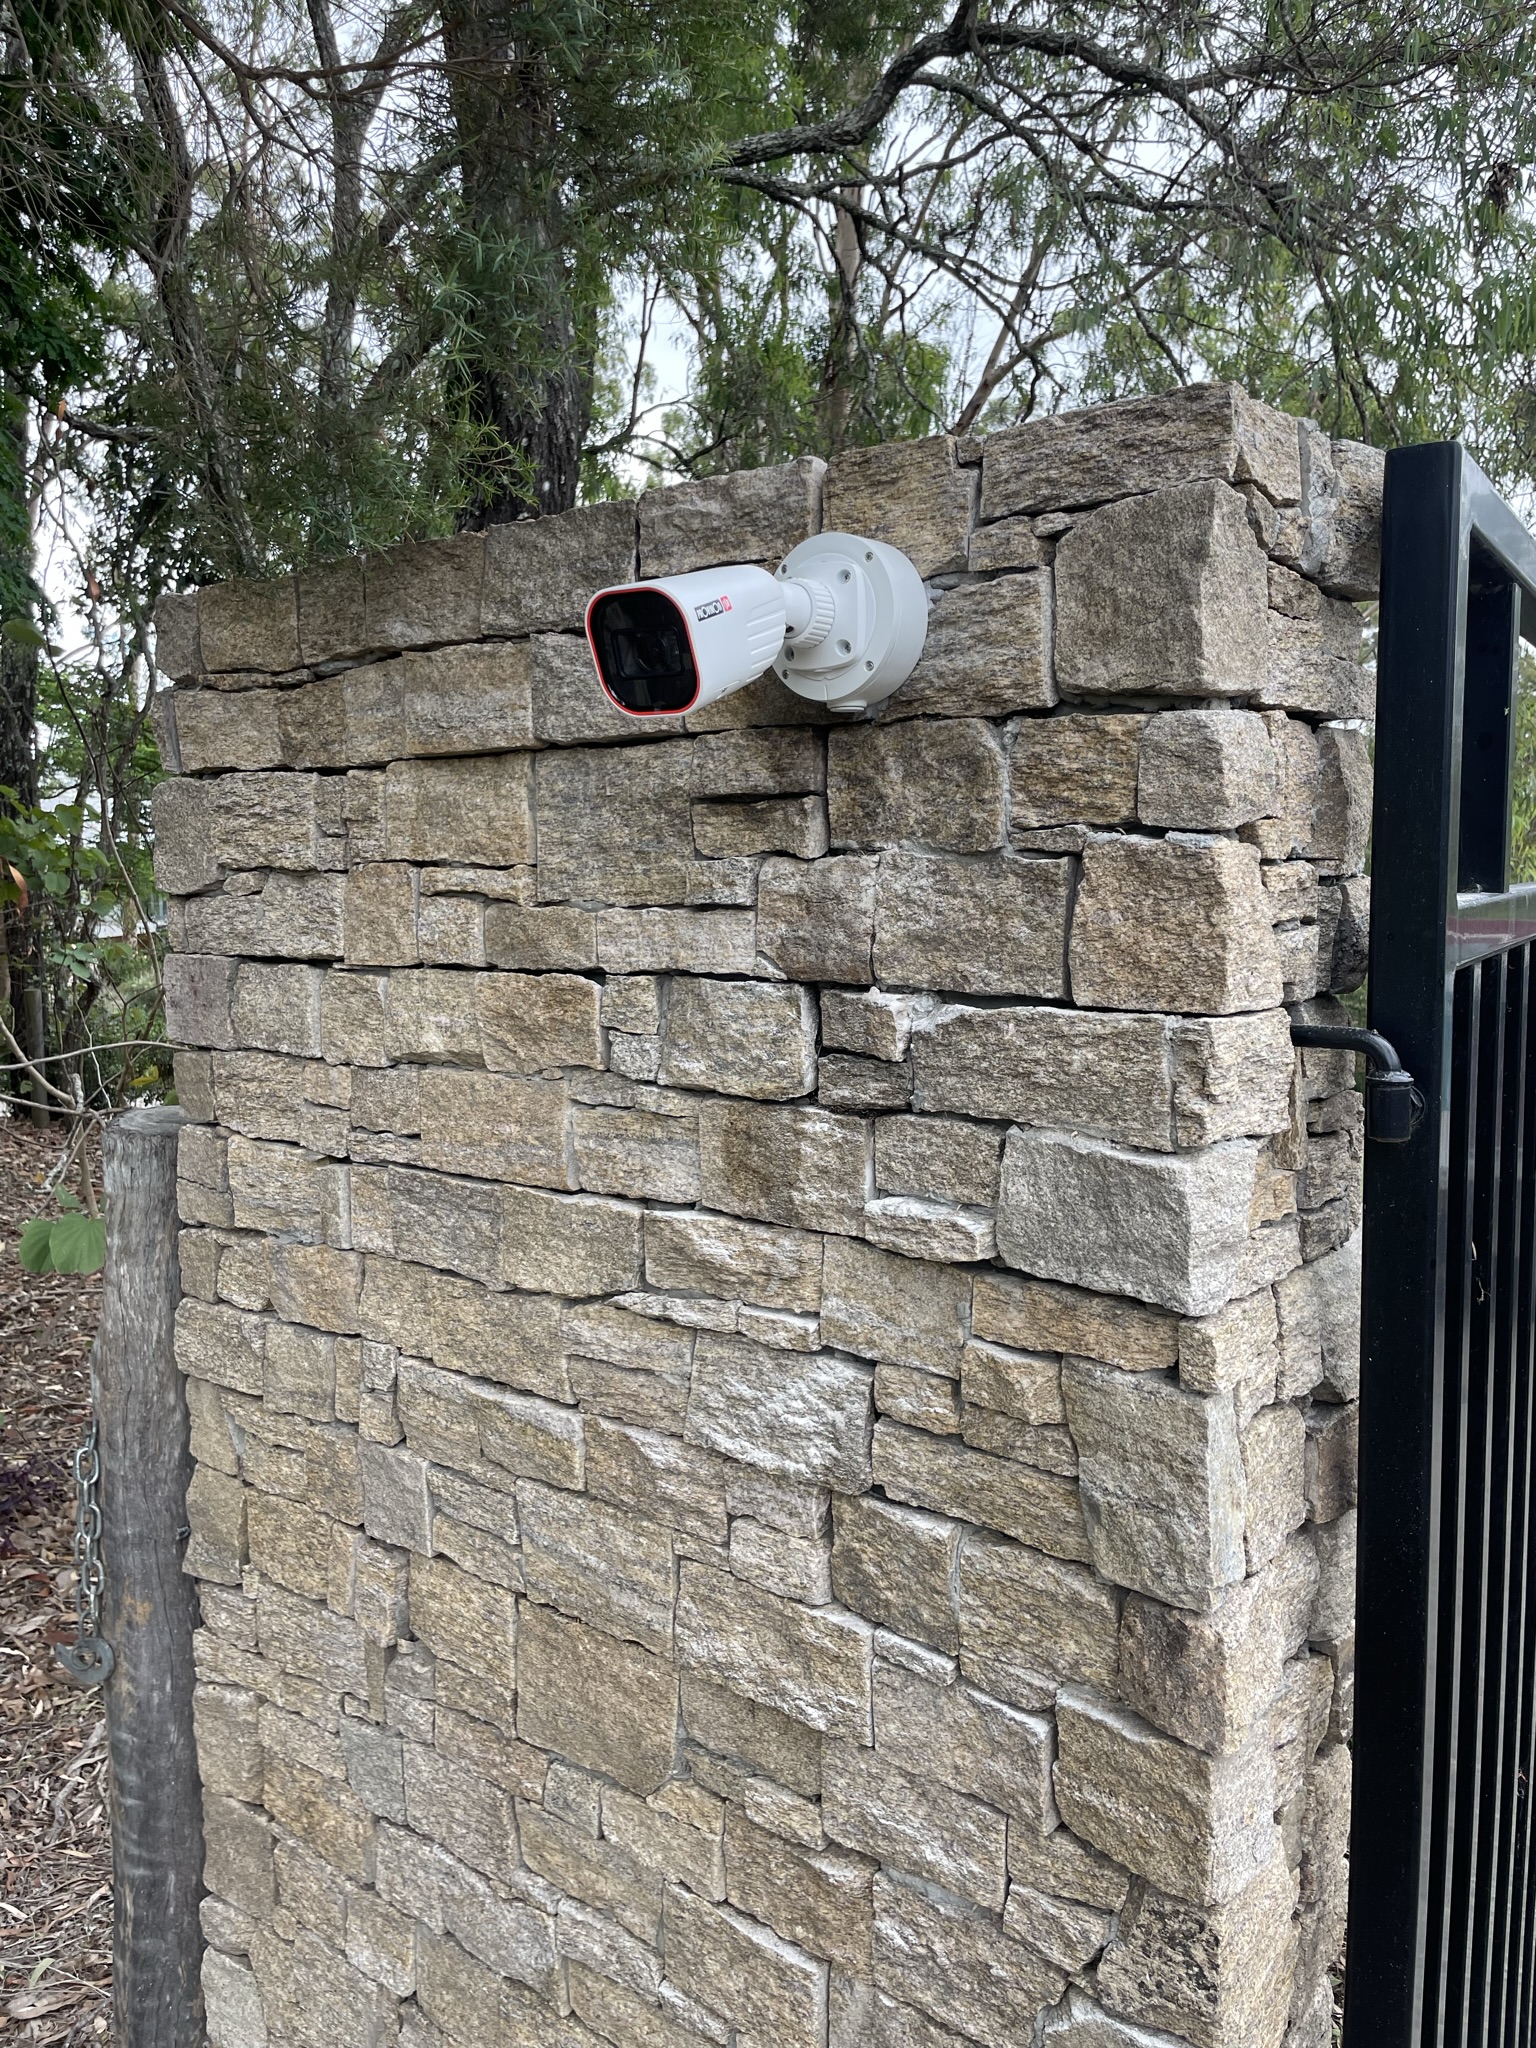 Cctv Security Setup On Gated Residential Property 